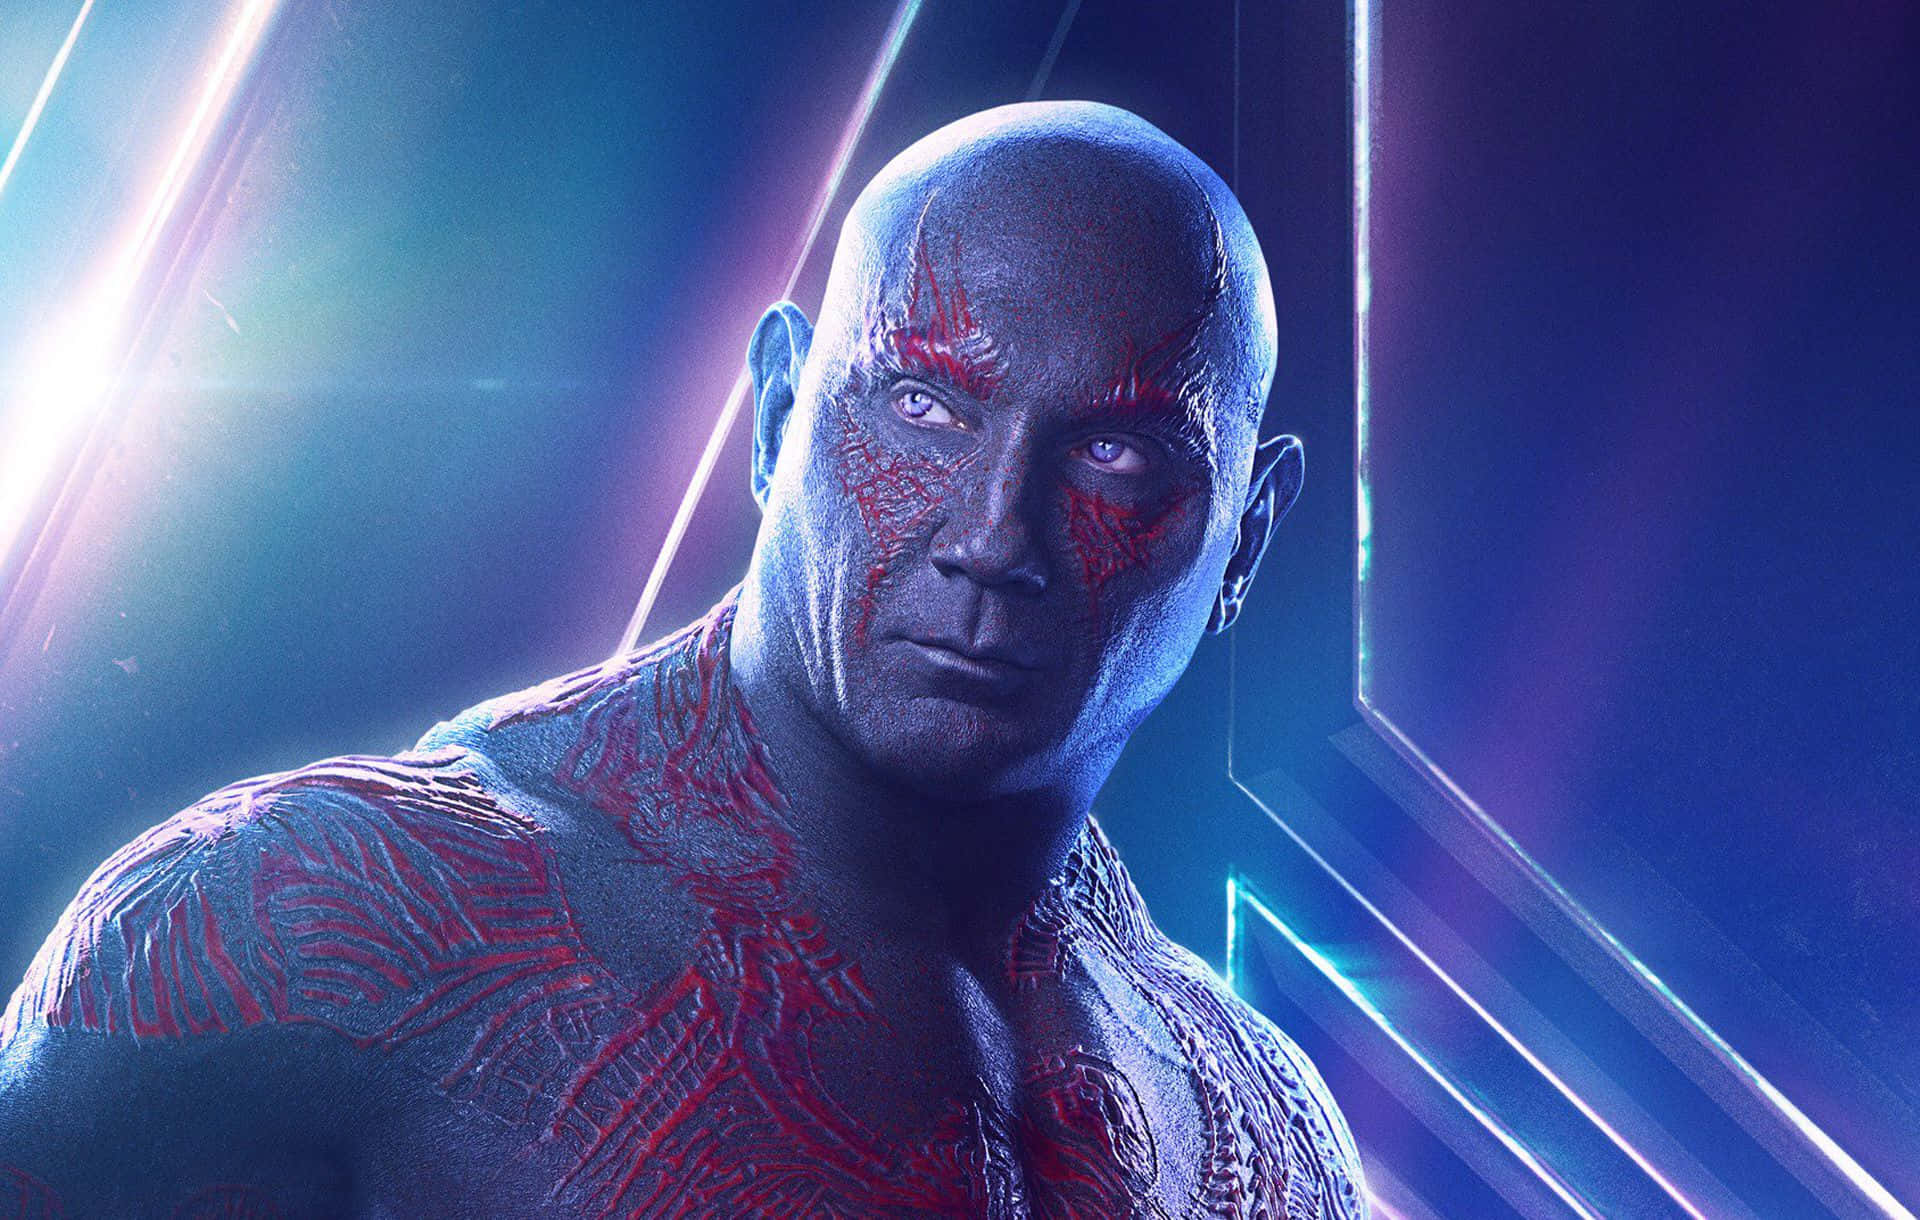 The Power of Drax - Power Beyond Its Limits Wallpaper